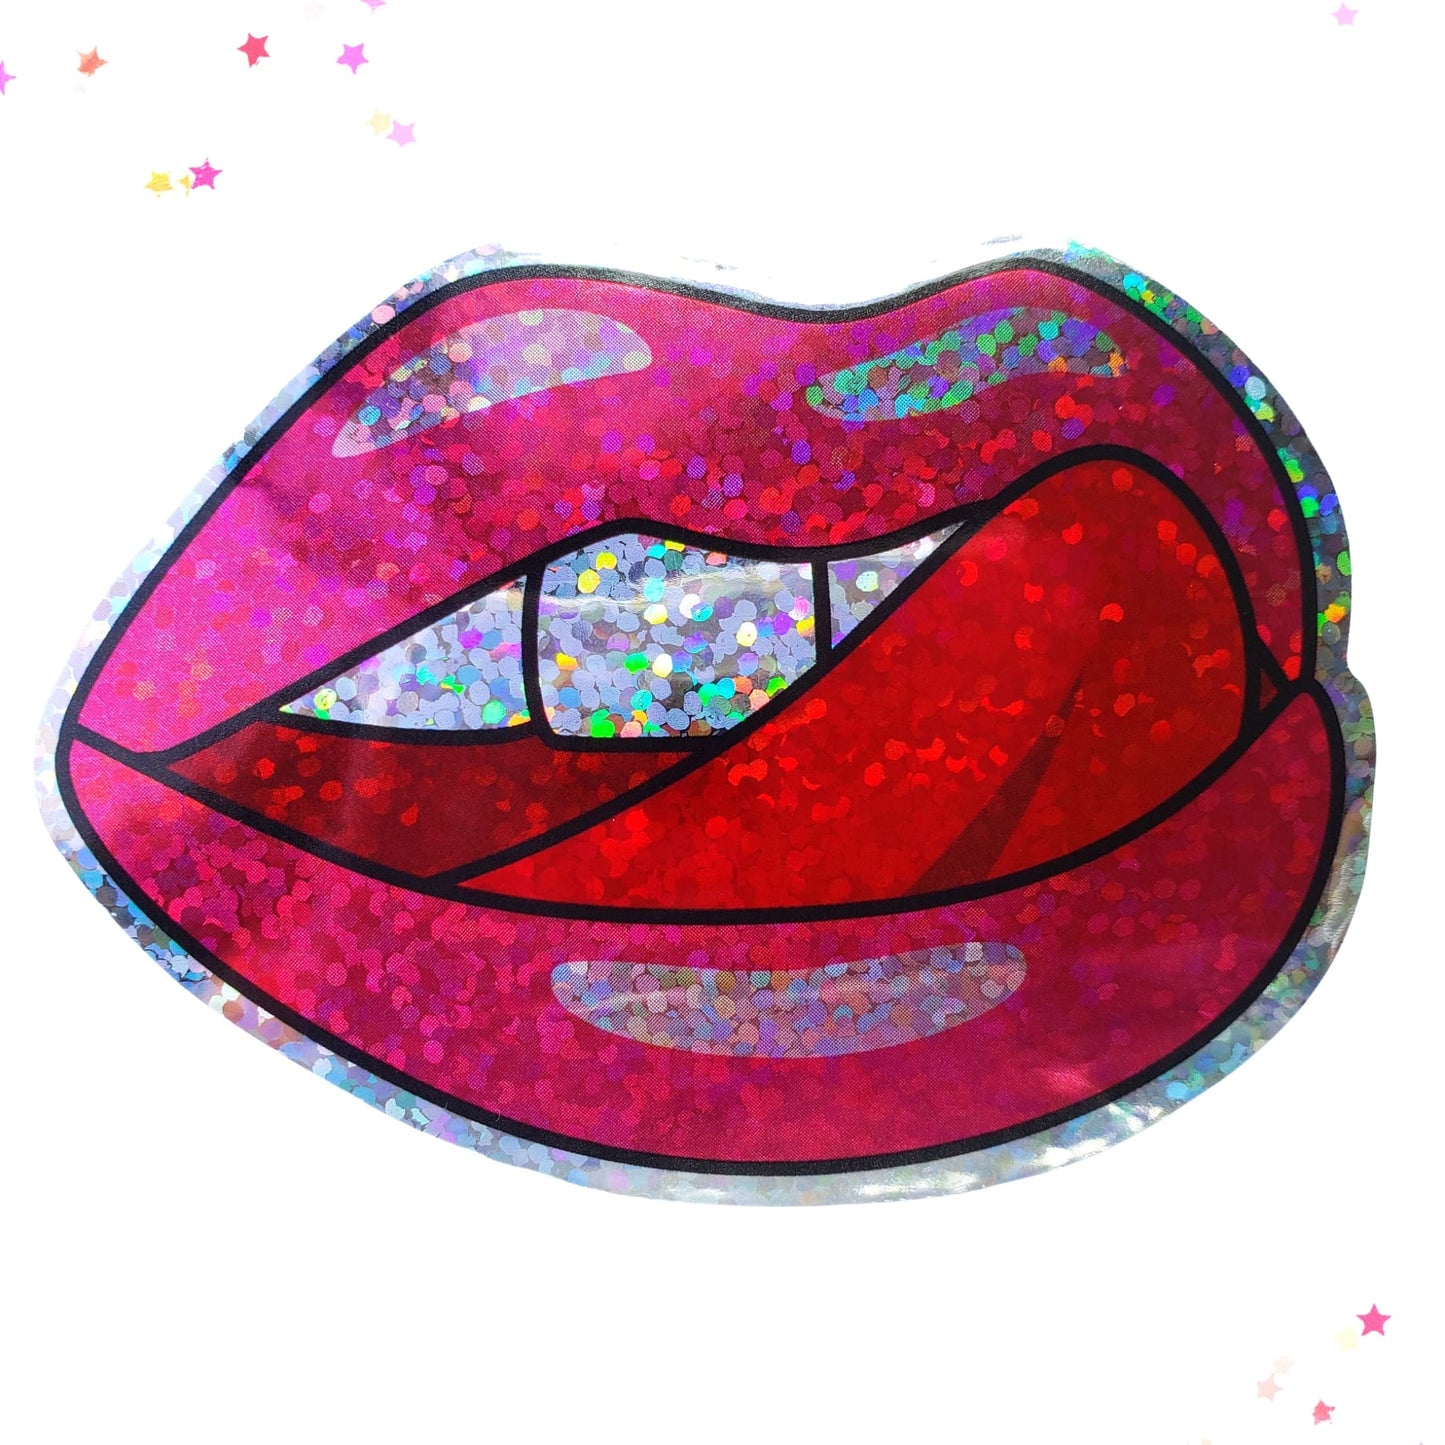 Premium Sticker - Sparkly Holographic Glitter Licking Lips from Confetti Kitty, Only 2.00